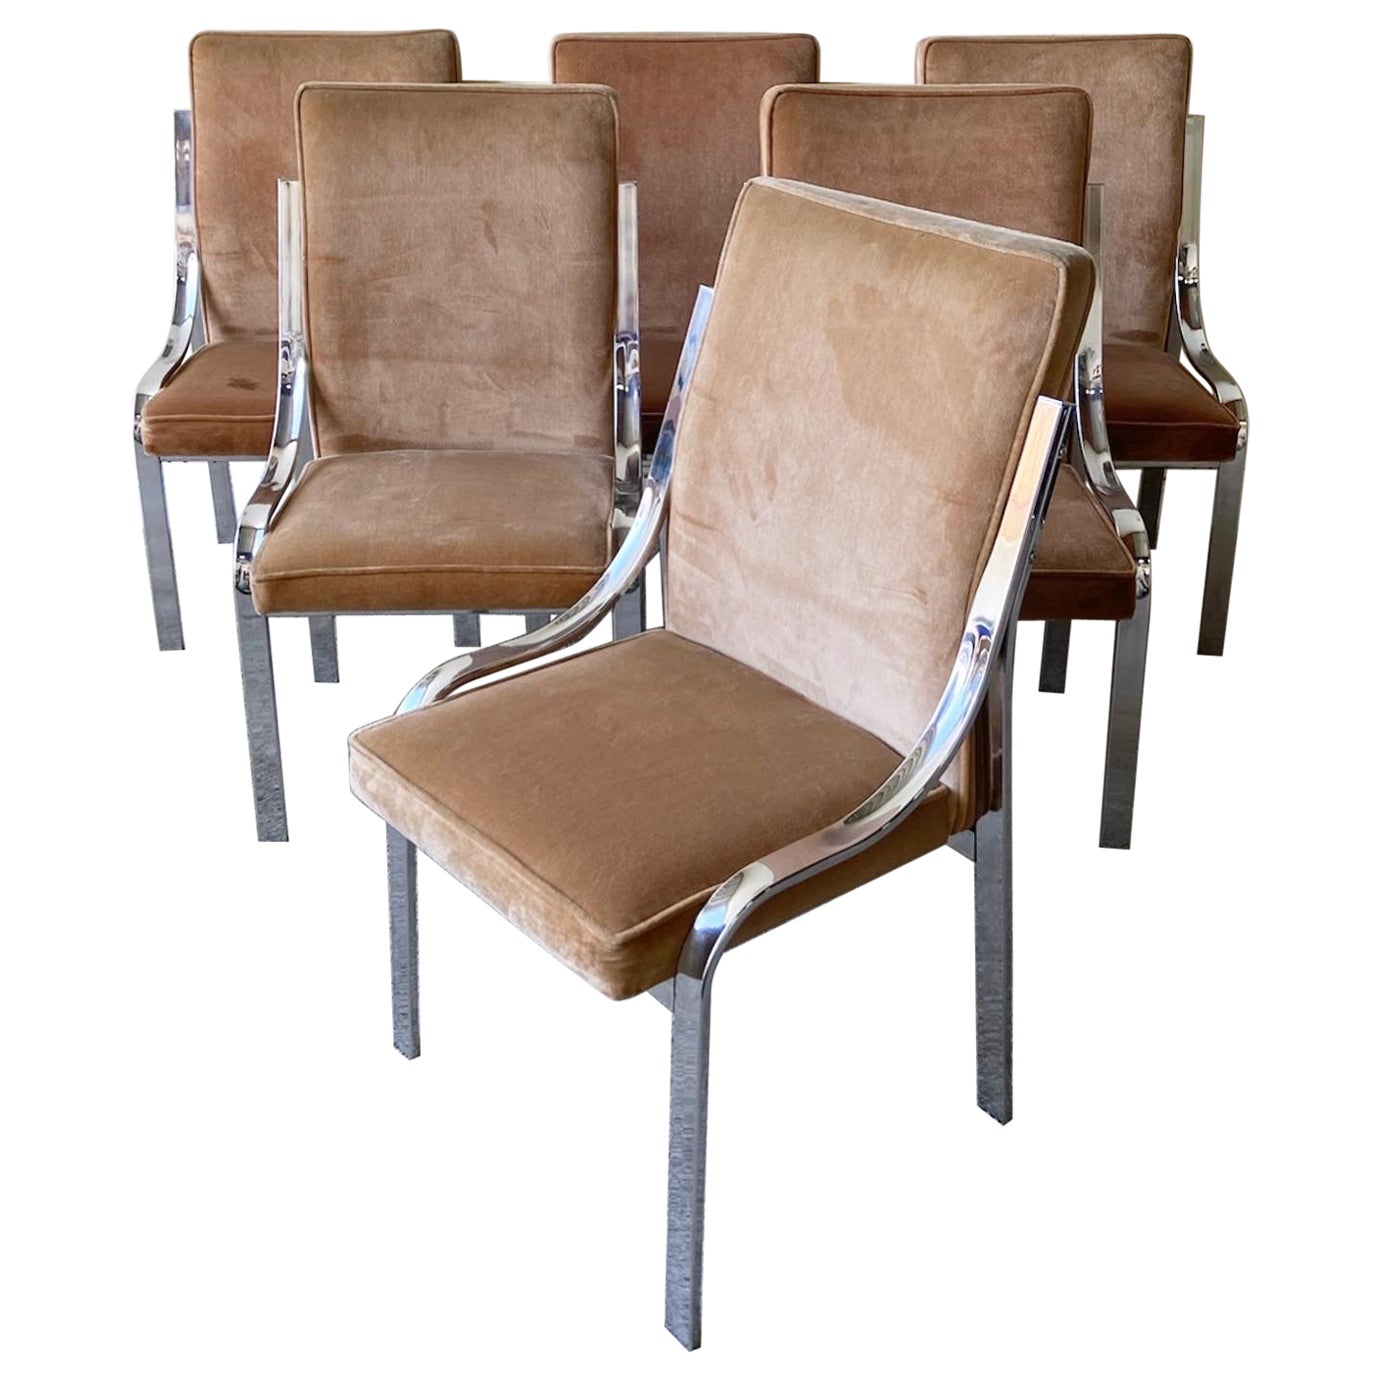 Mid Century Modern Brown Velvet & Chrome Dining Chairs - 6 Pieces